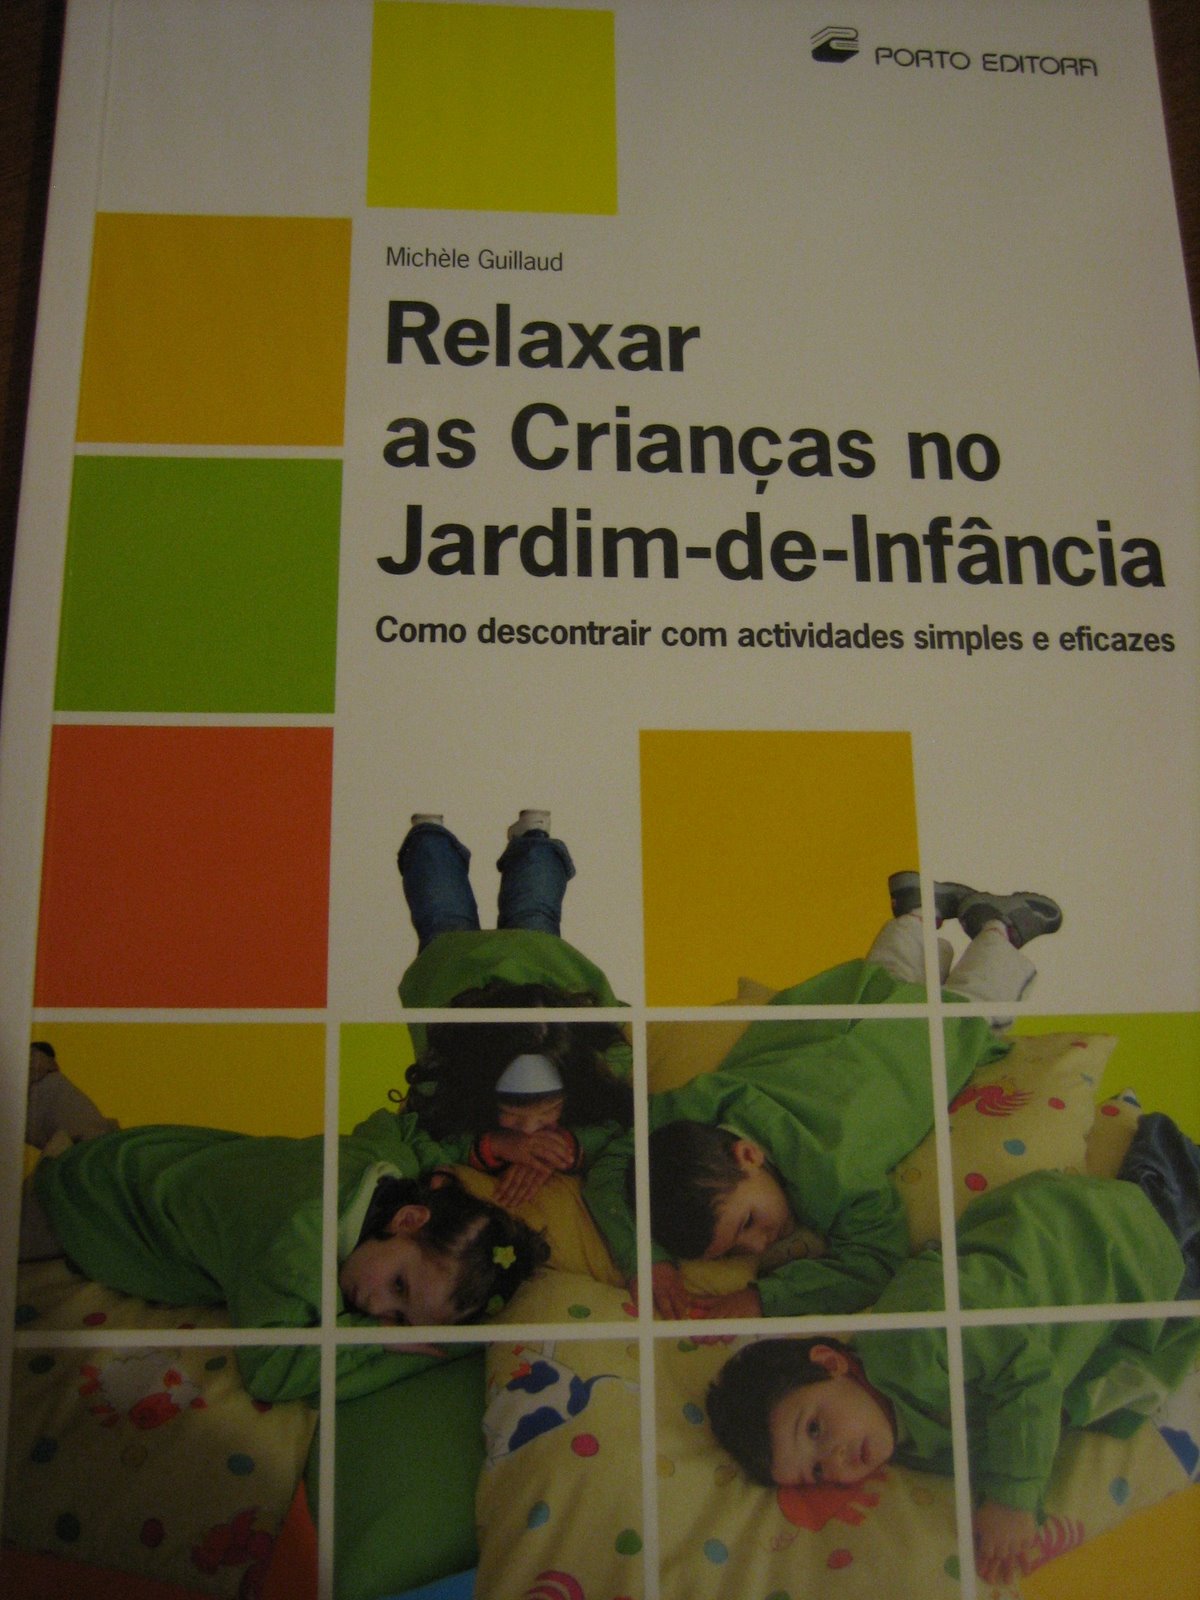 relaxar